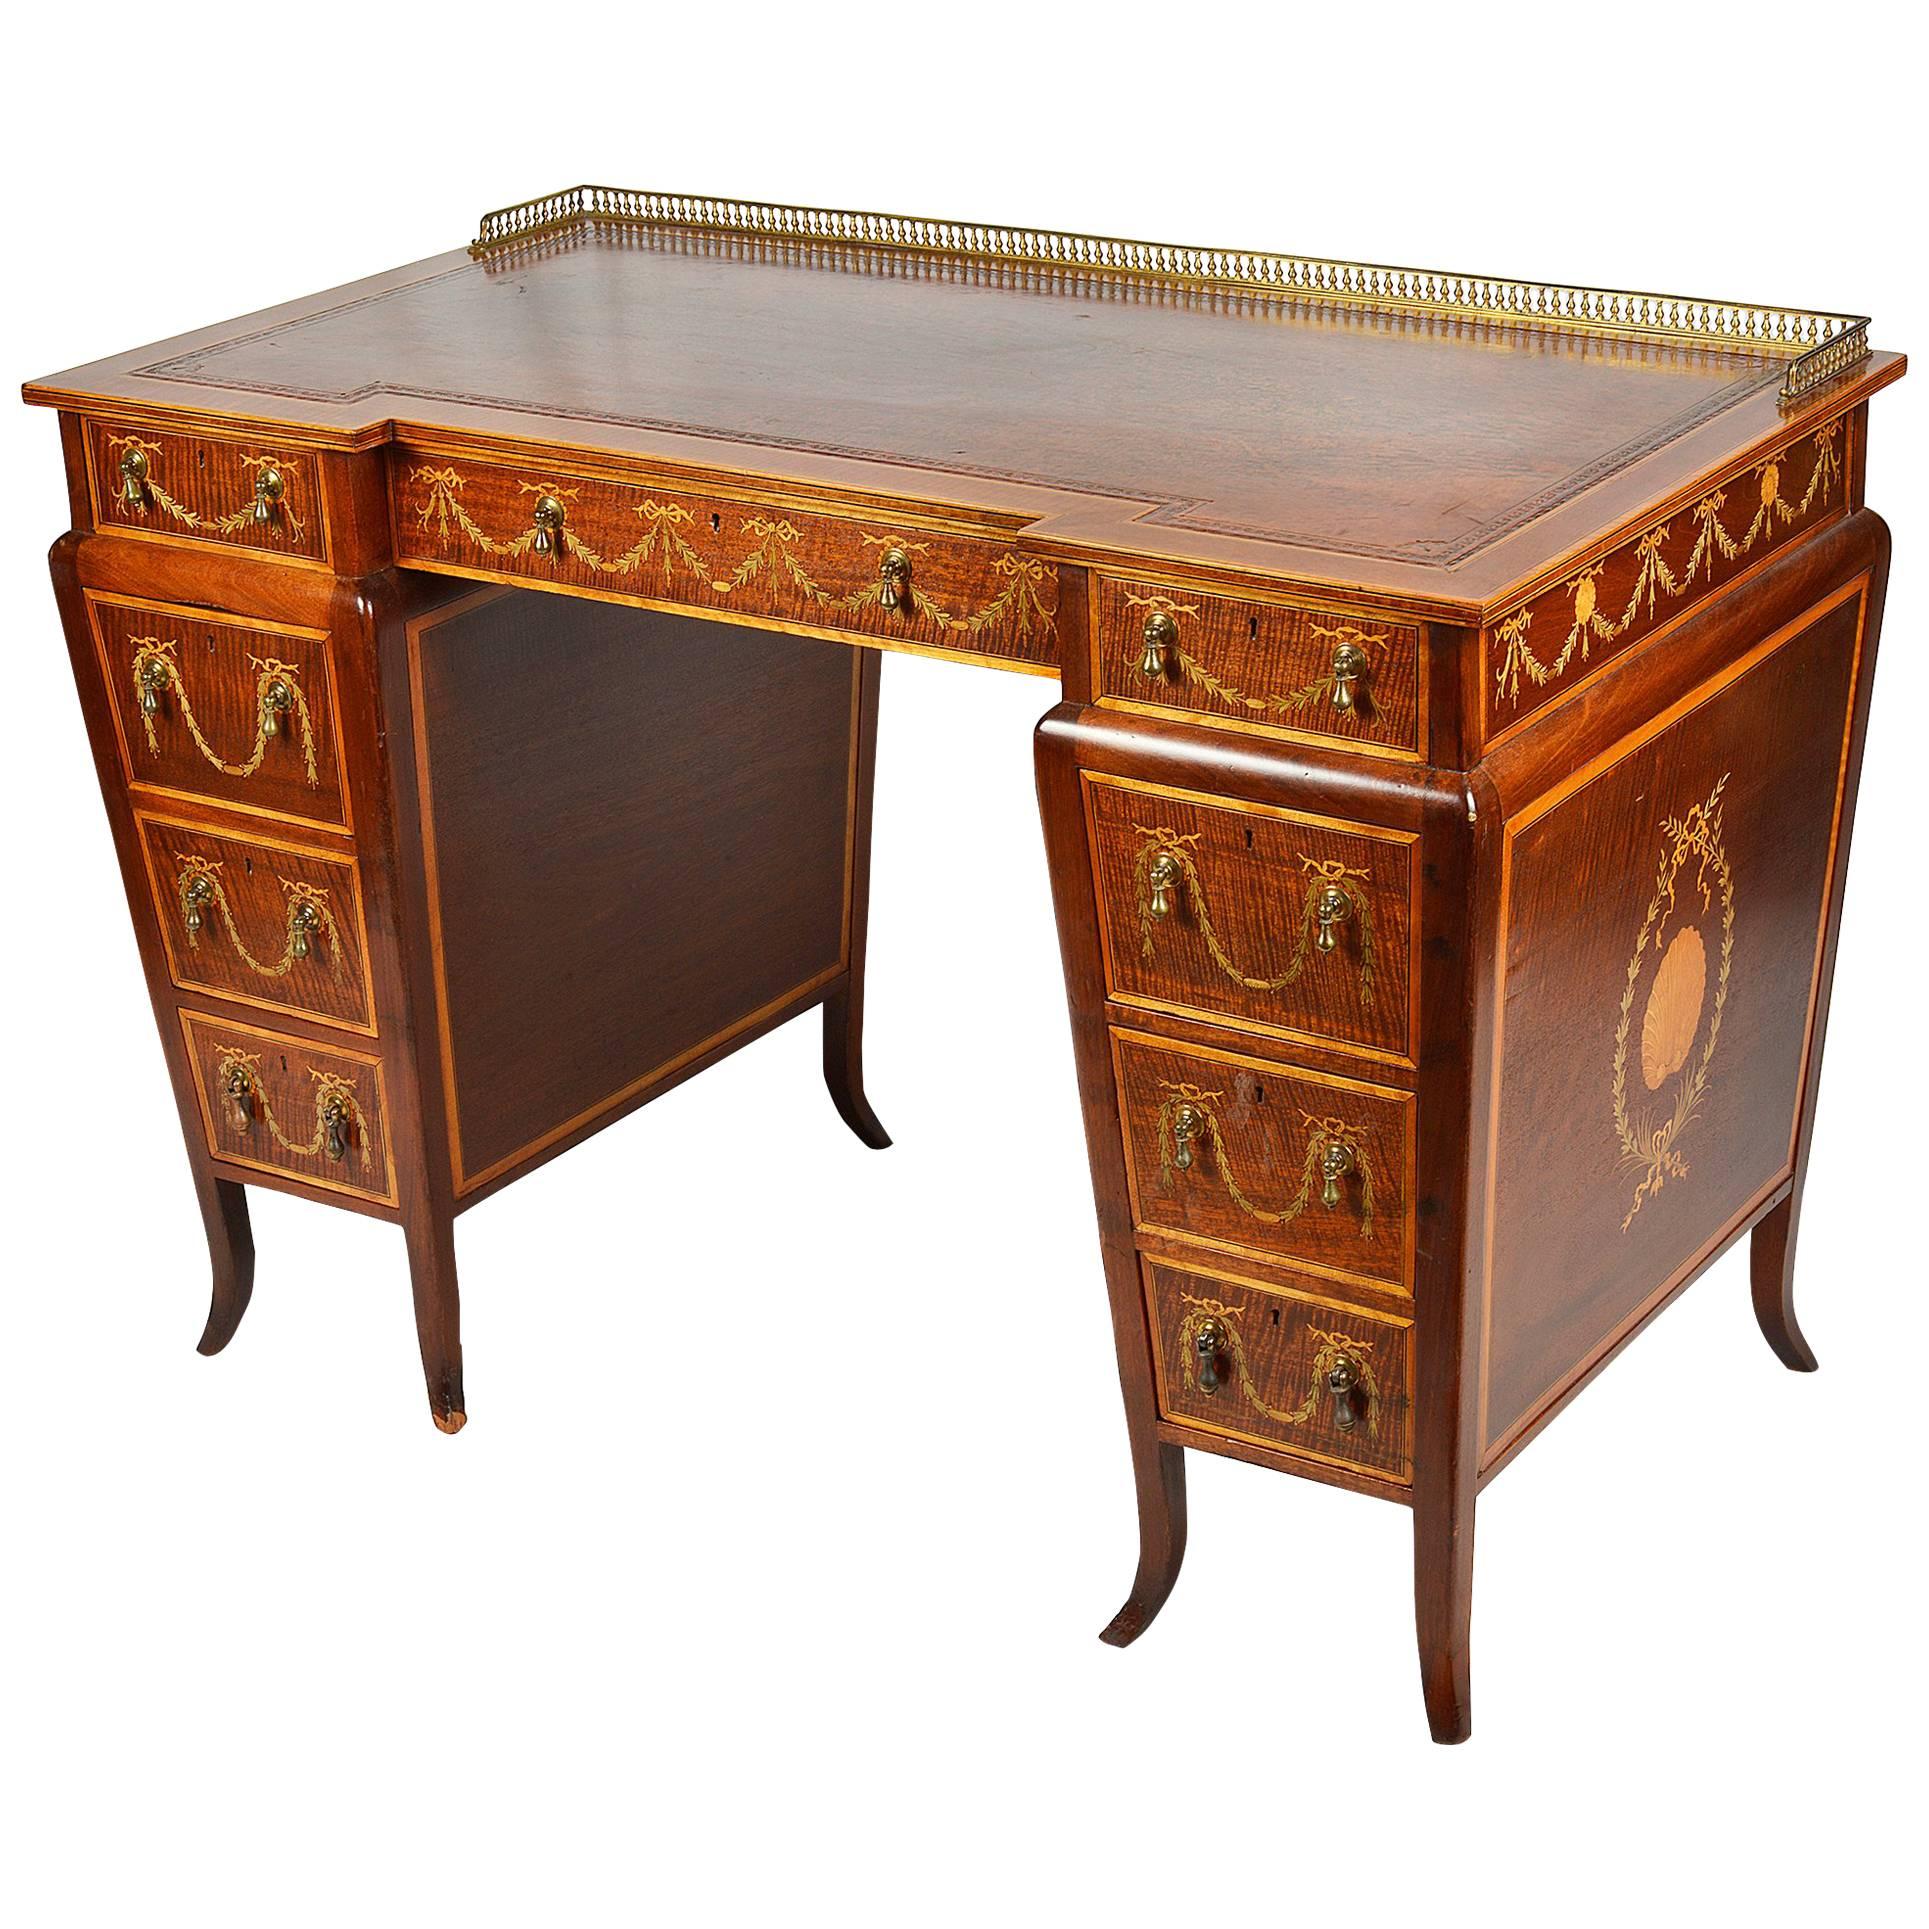 Sheraton Revival Inlaid Desk, 19th Century, Edwards and Roberts For Sale